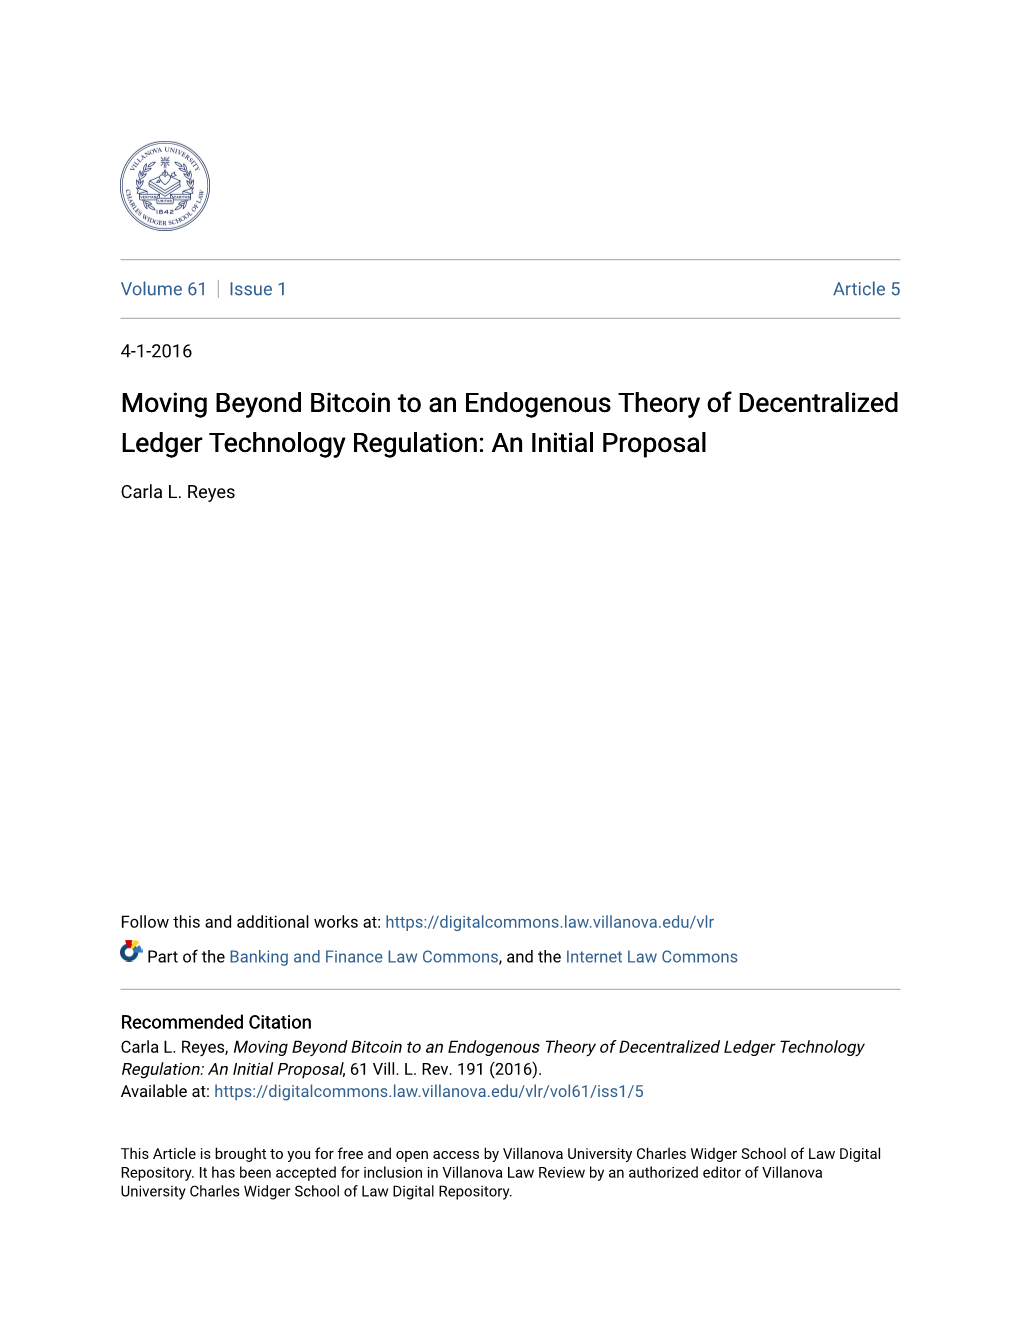 Moving Beyond Bitcoin to an Endogenous Theory of Decentralized Ledger Technology Regulation: an Initial Proposal